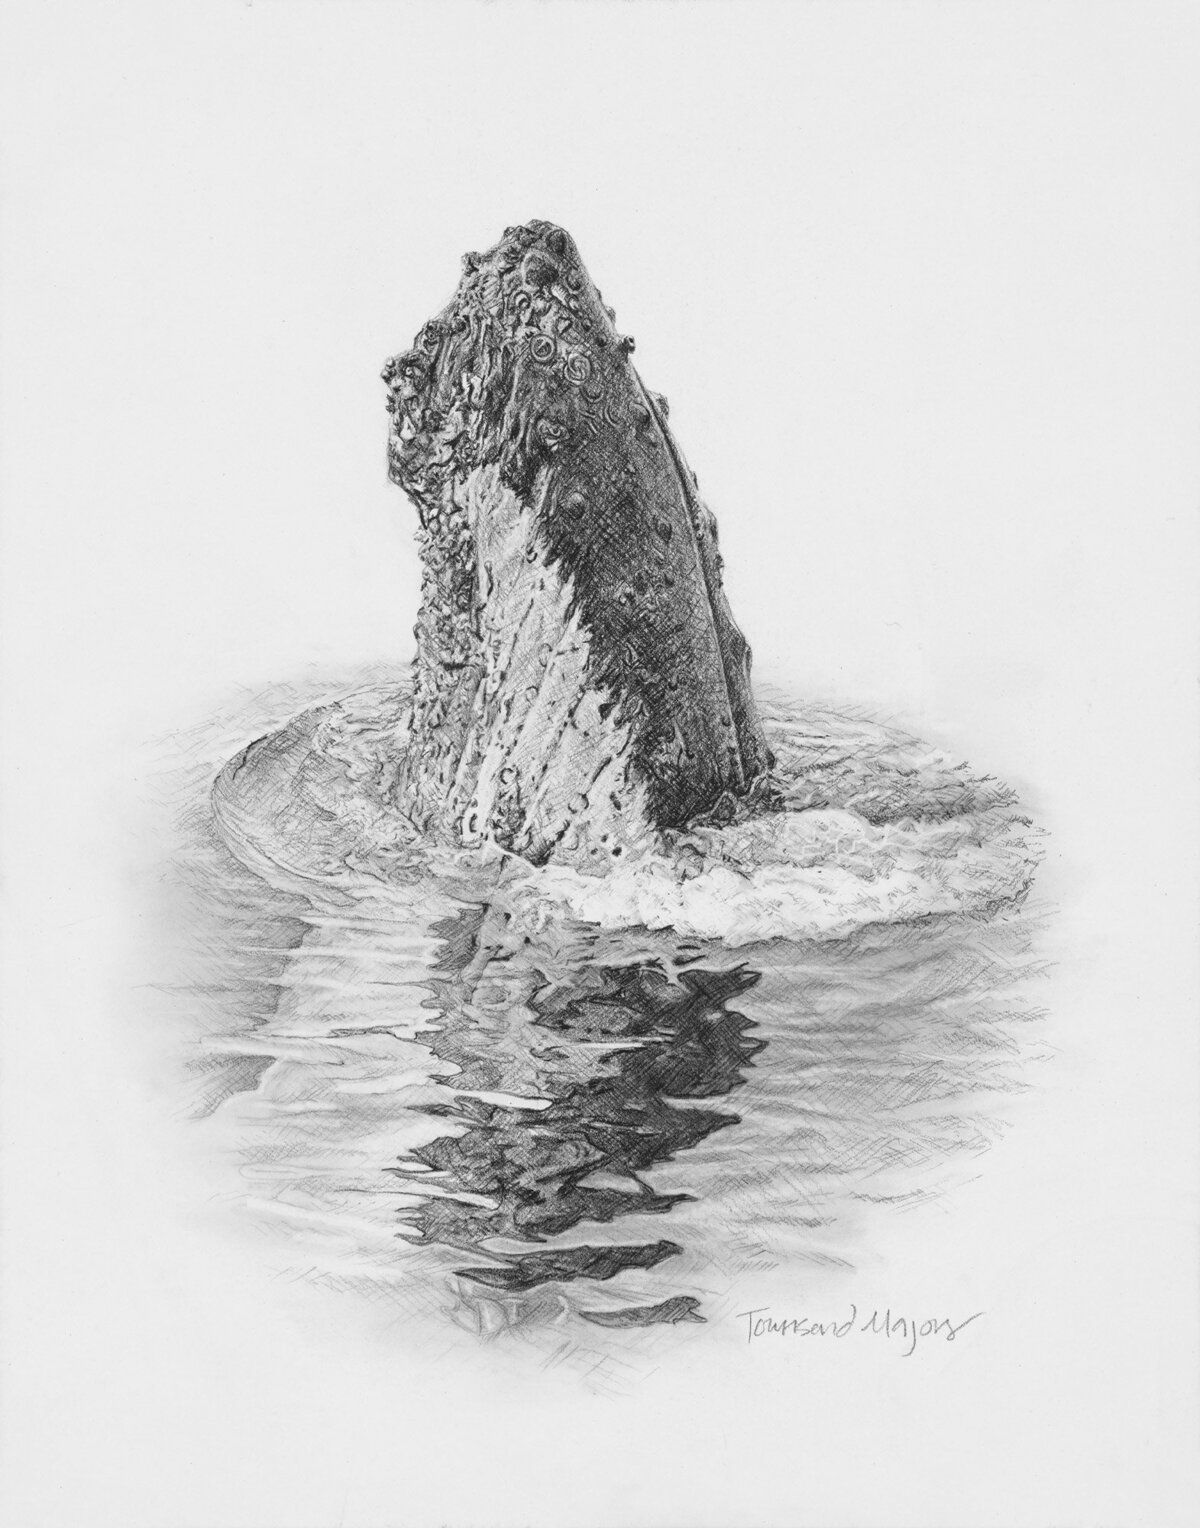 Townsend Majors' graphite drawing of a humpback whale